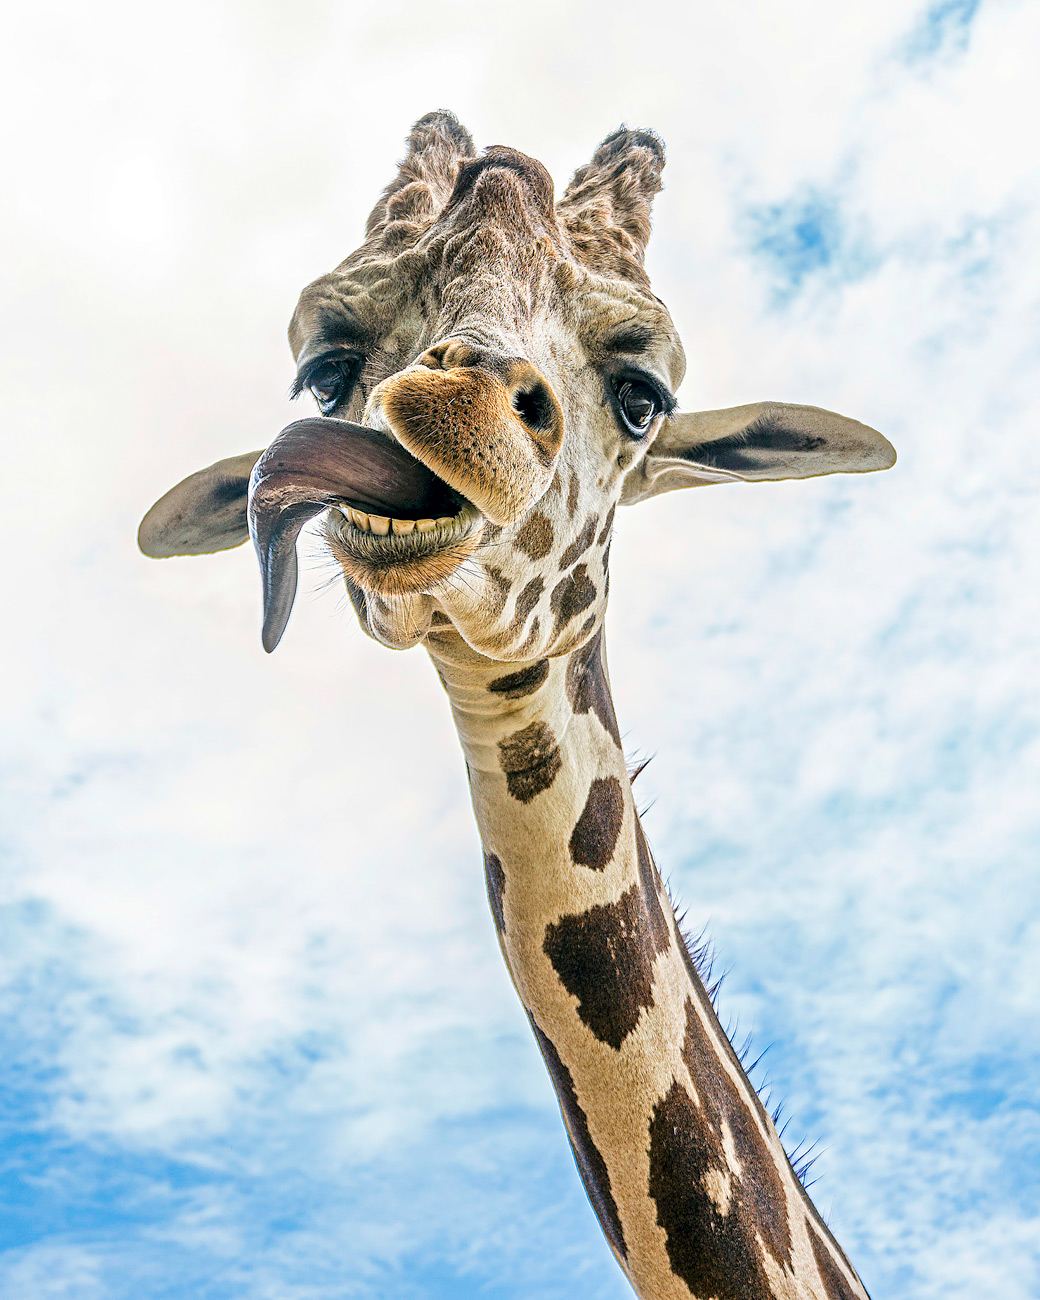 A giraffe is looking up at the camera.